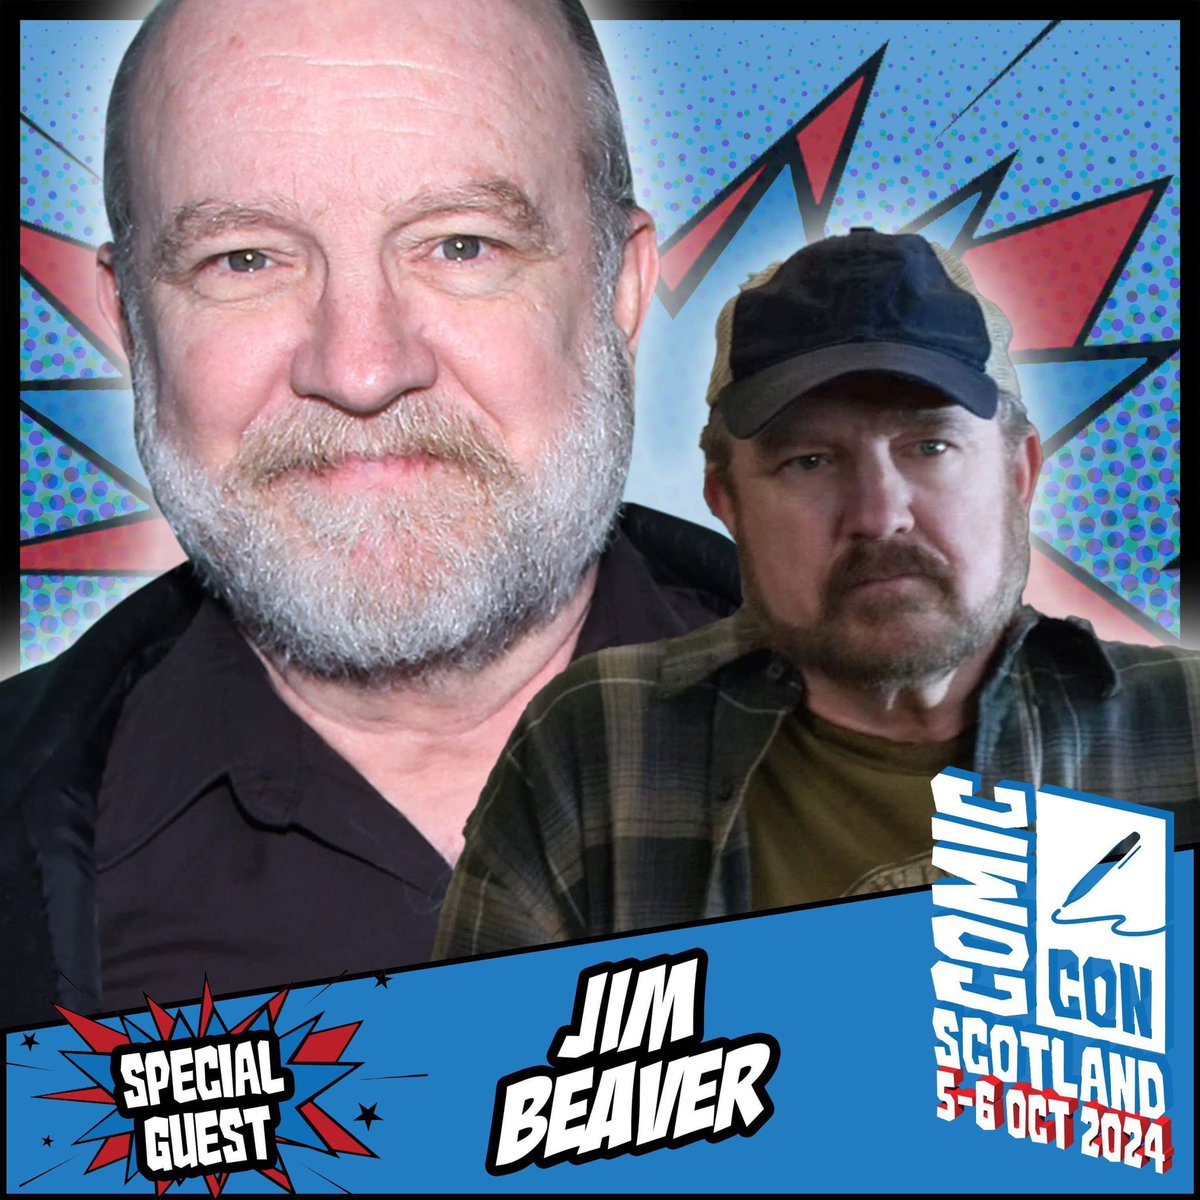 Comic Con Scotland welcomes Jim Beaver, known for projects such as Supernatural, Deadwood, The Boys, and many more. Appearing 5-6 October! Tickets: comicconventionscotland.co.uk